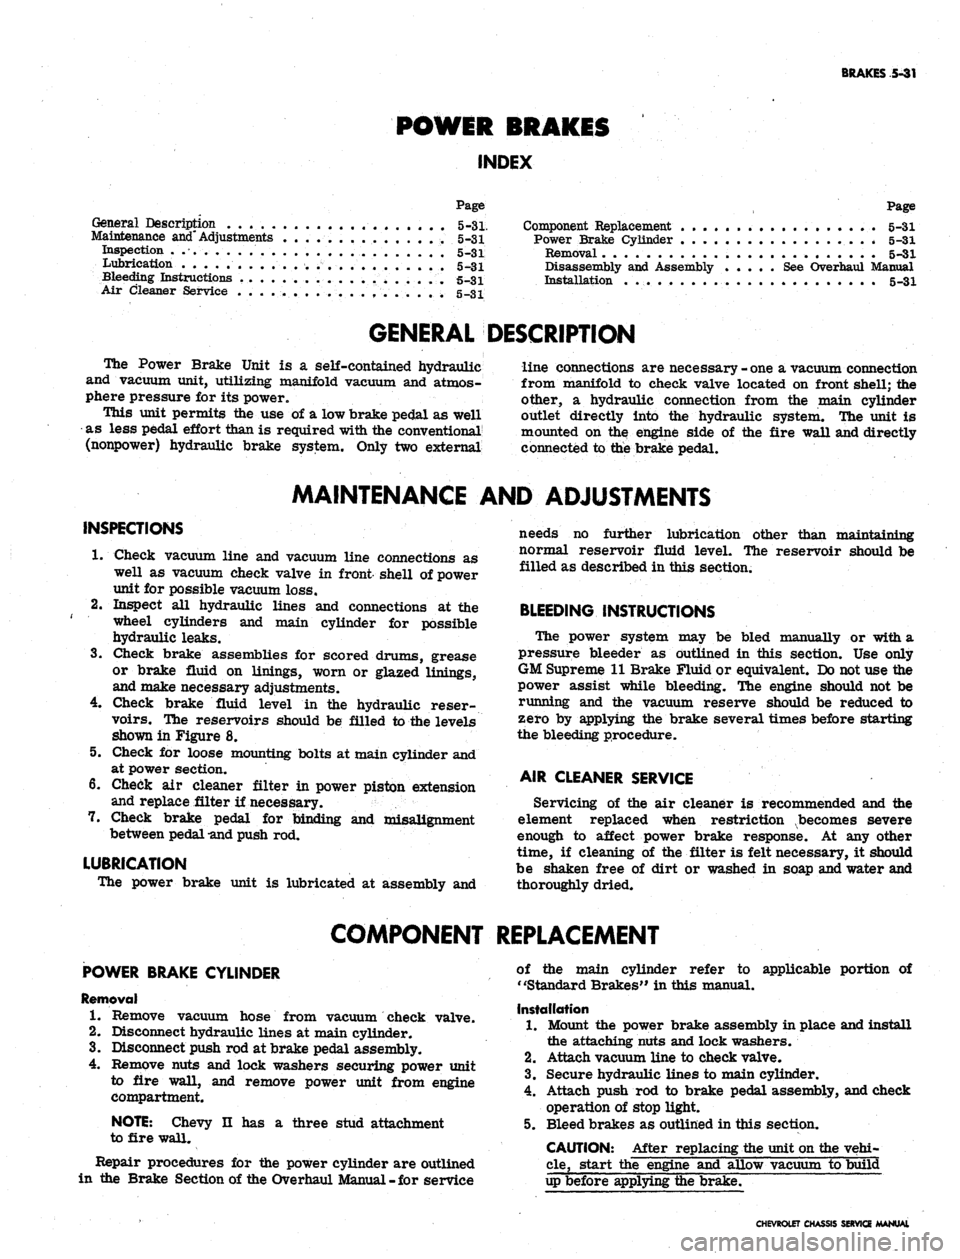 CHEVROLET CAMARO 1967 1.G Chassis Workshop Manual 
BRAKES
 5-31

POWER BRAKES

INDEX

General Description 5-31

Maintenance
 and"
 Adjustments 5-31

Inspection . ... 5_31

Lubrication 5-31

Bleeding Instructions . . . 5.31

Air Cleaner Service . . . 